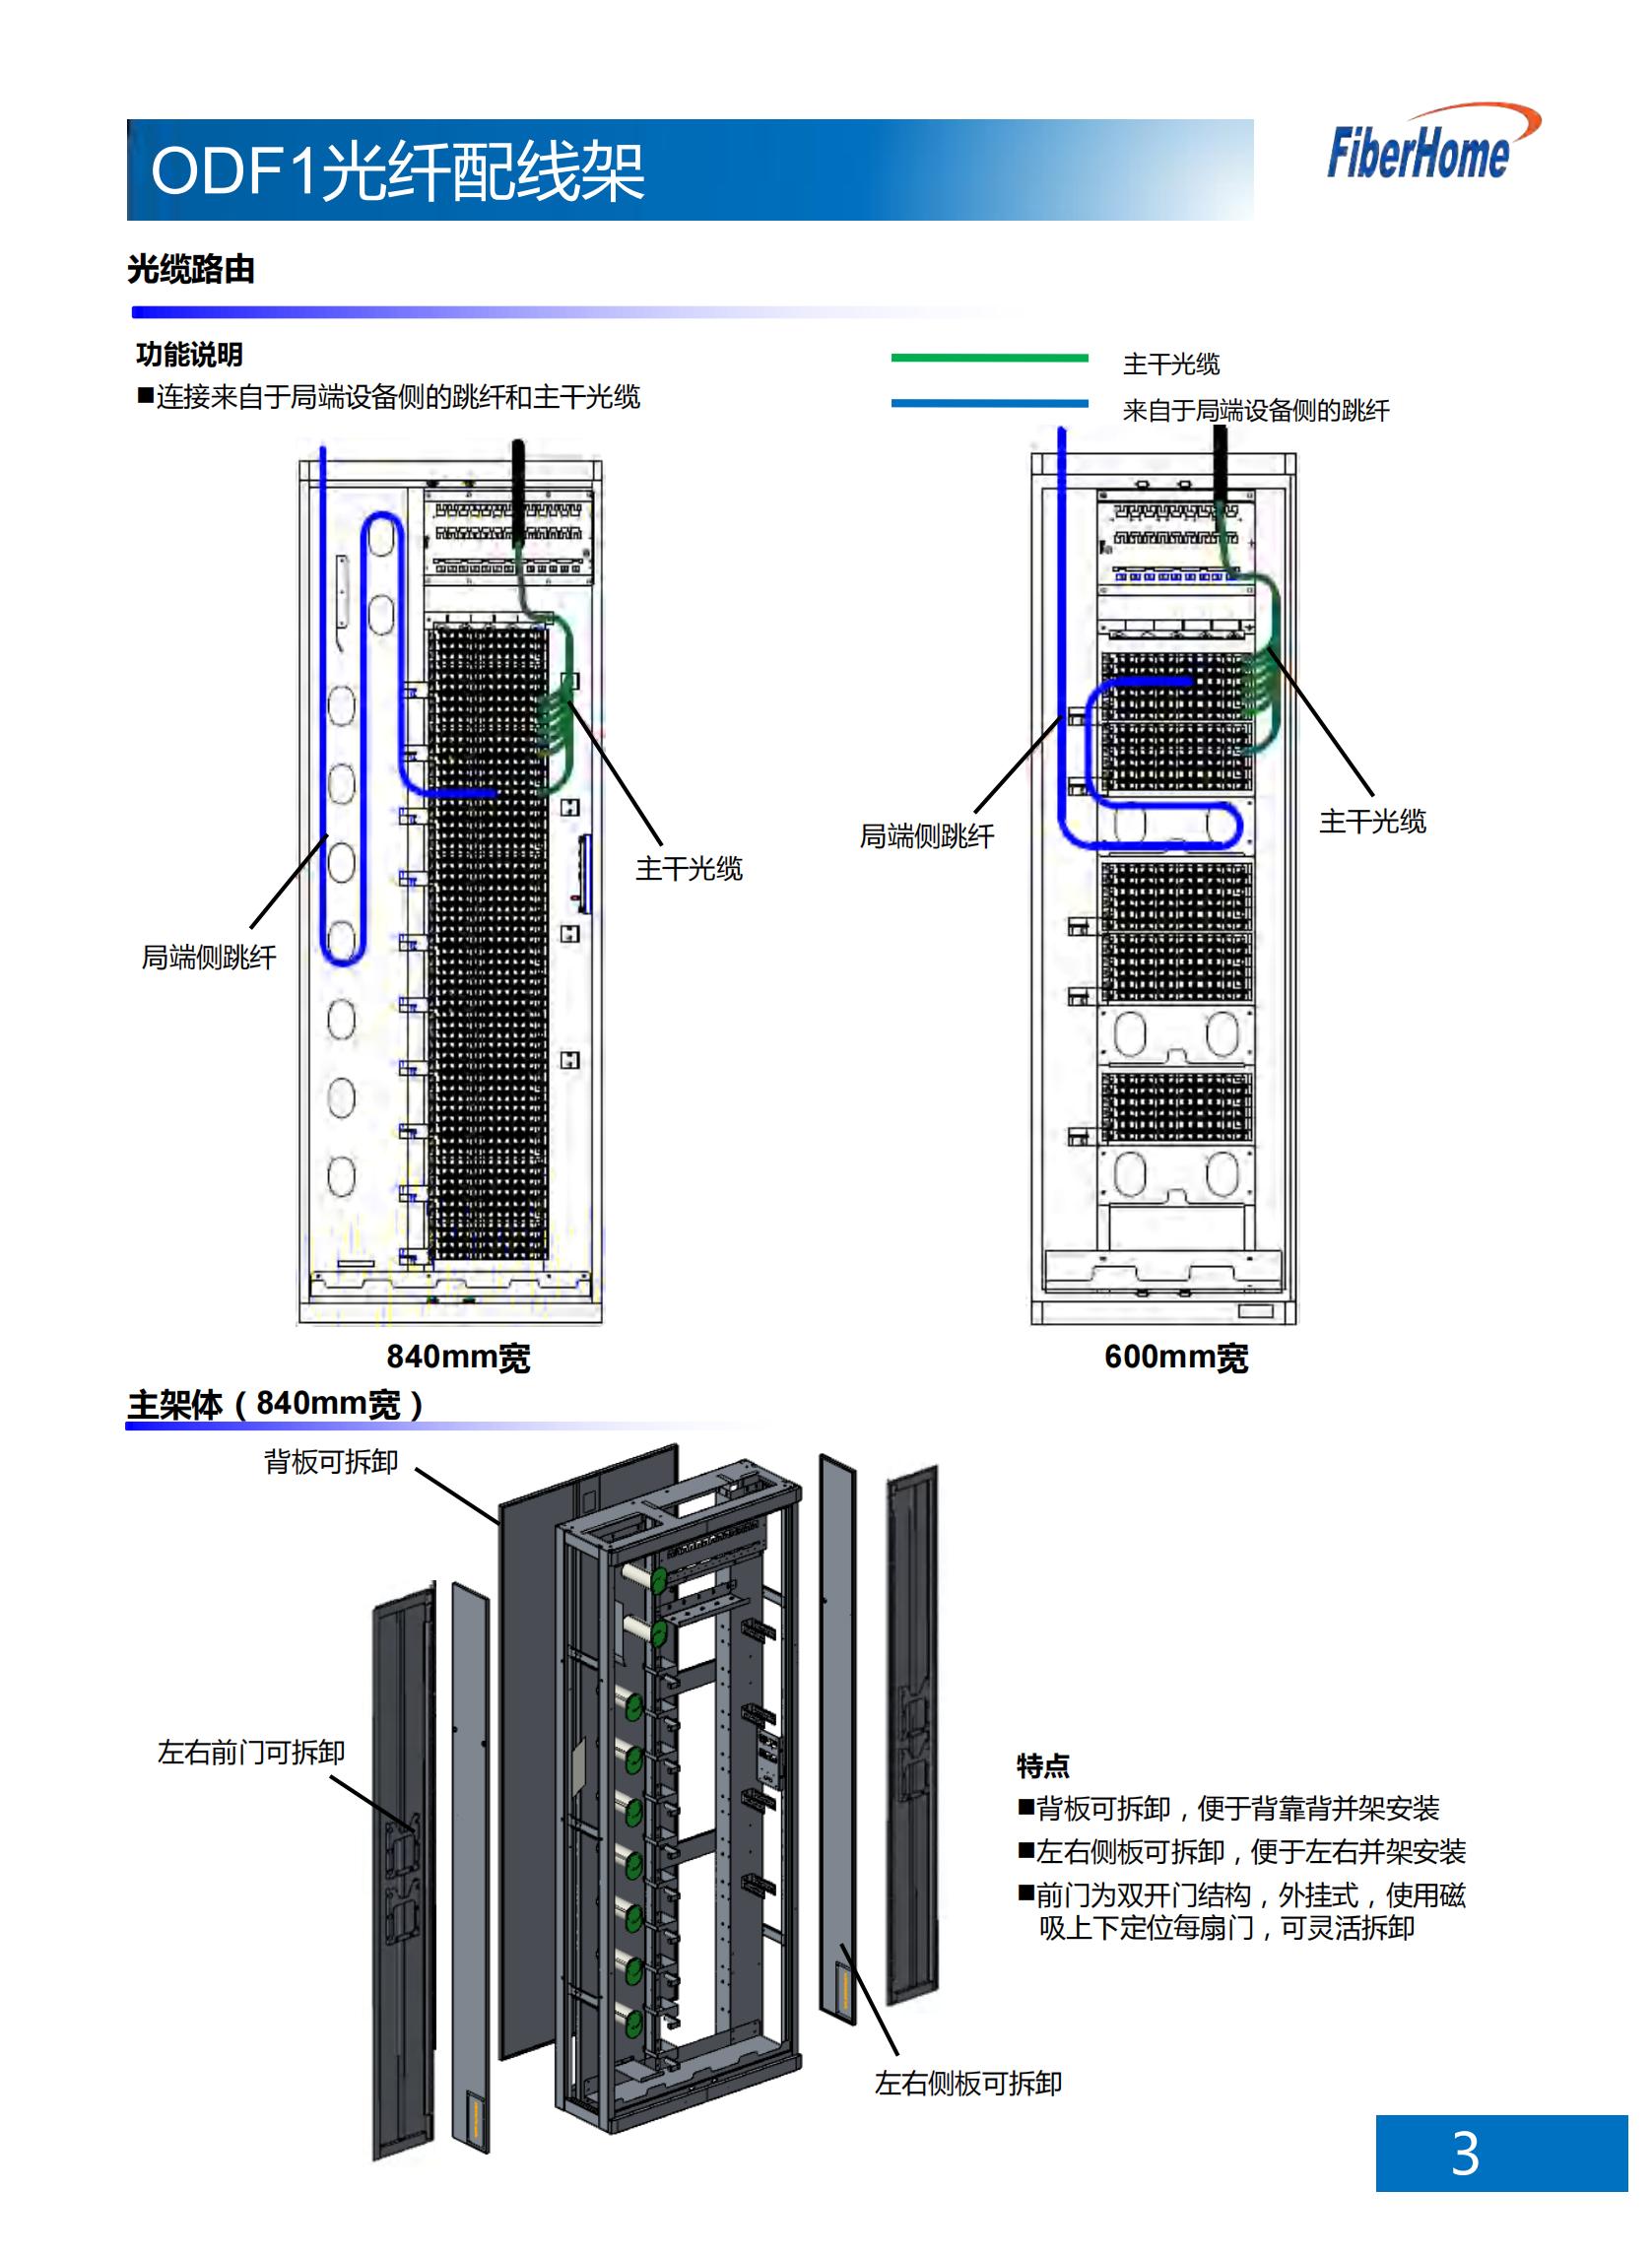 ODF101-864-A1-SC ODF optical fiber distribution frame (864-core floor-standing without sub-frame type with 12-core SC fusion integration unit)